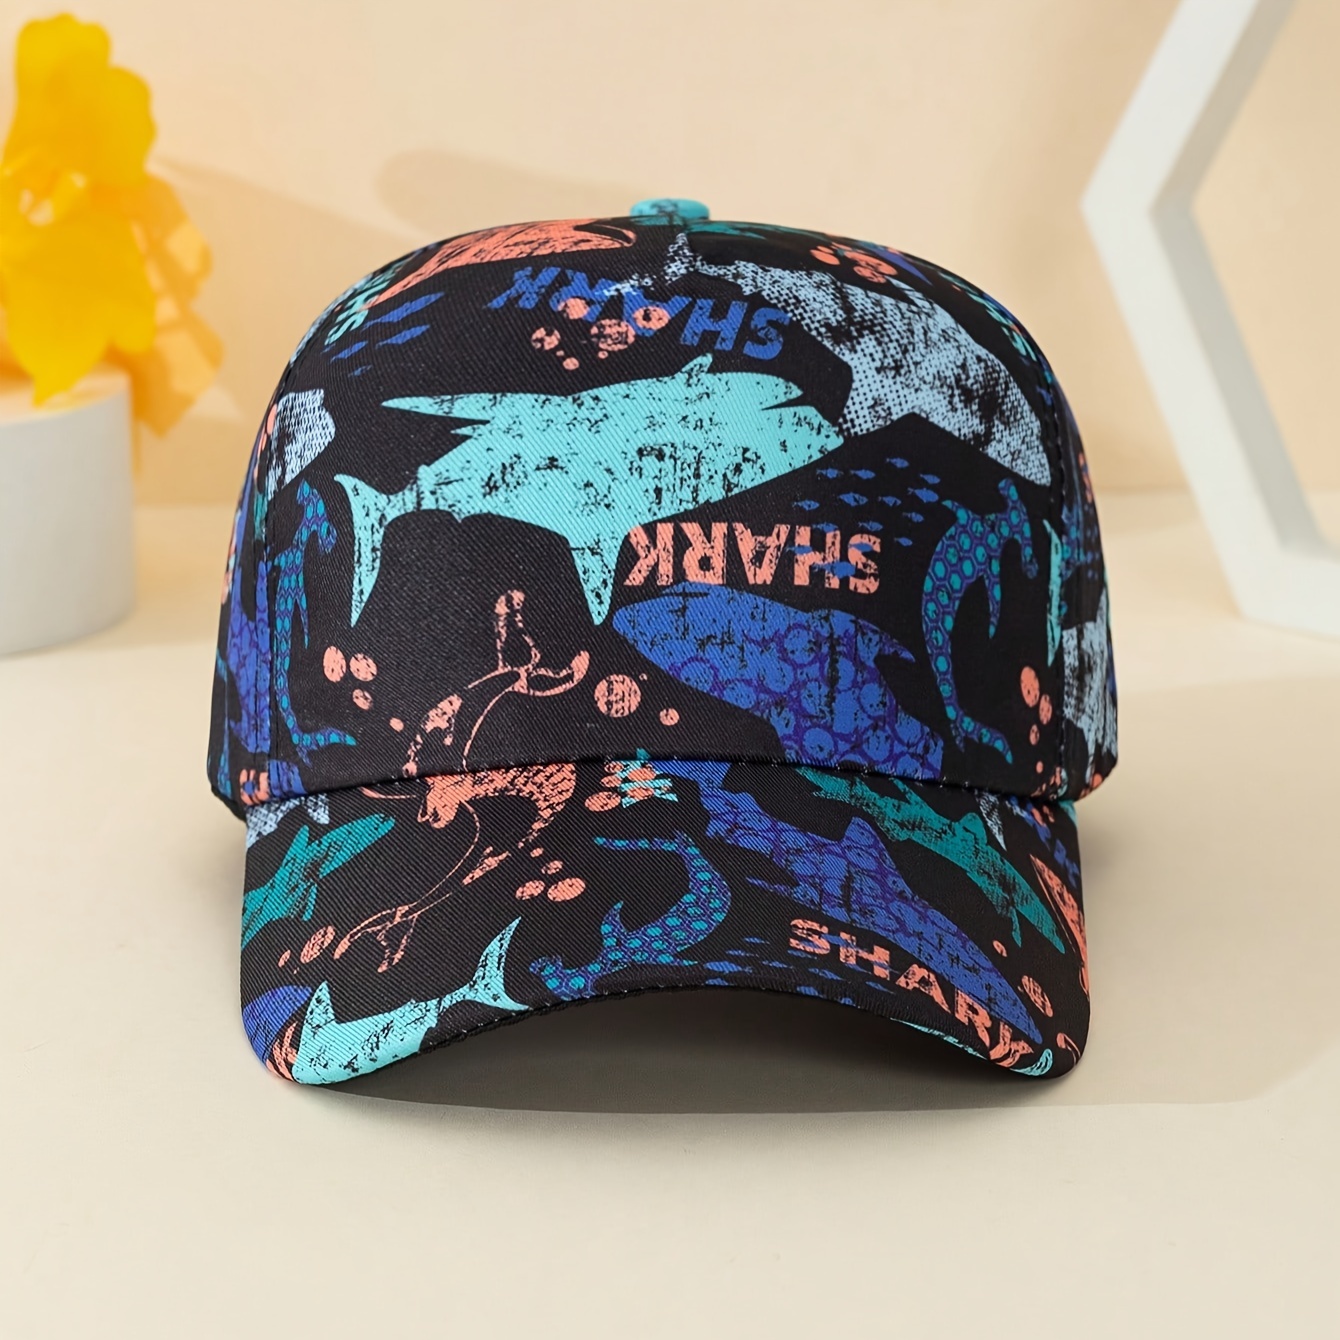 

1pc Shark Print Tie-dye Cute And Cool Black Baseball Cap For All Seasons, Suitable For Daily Wear, Outdoor Outings, Children's Day Gifts